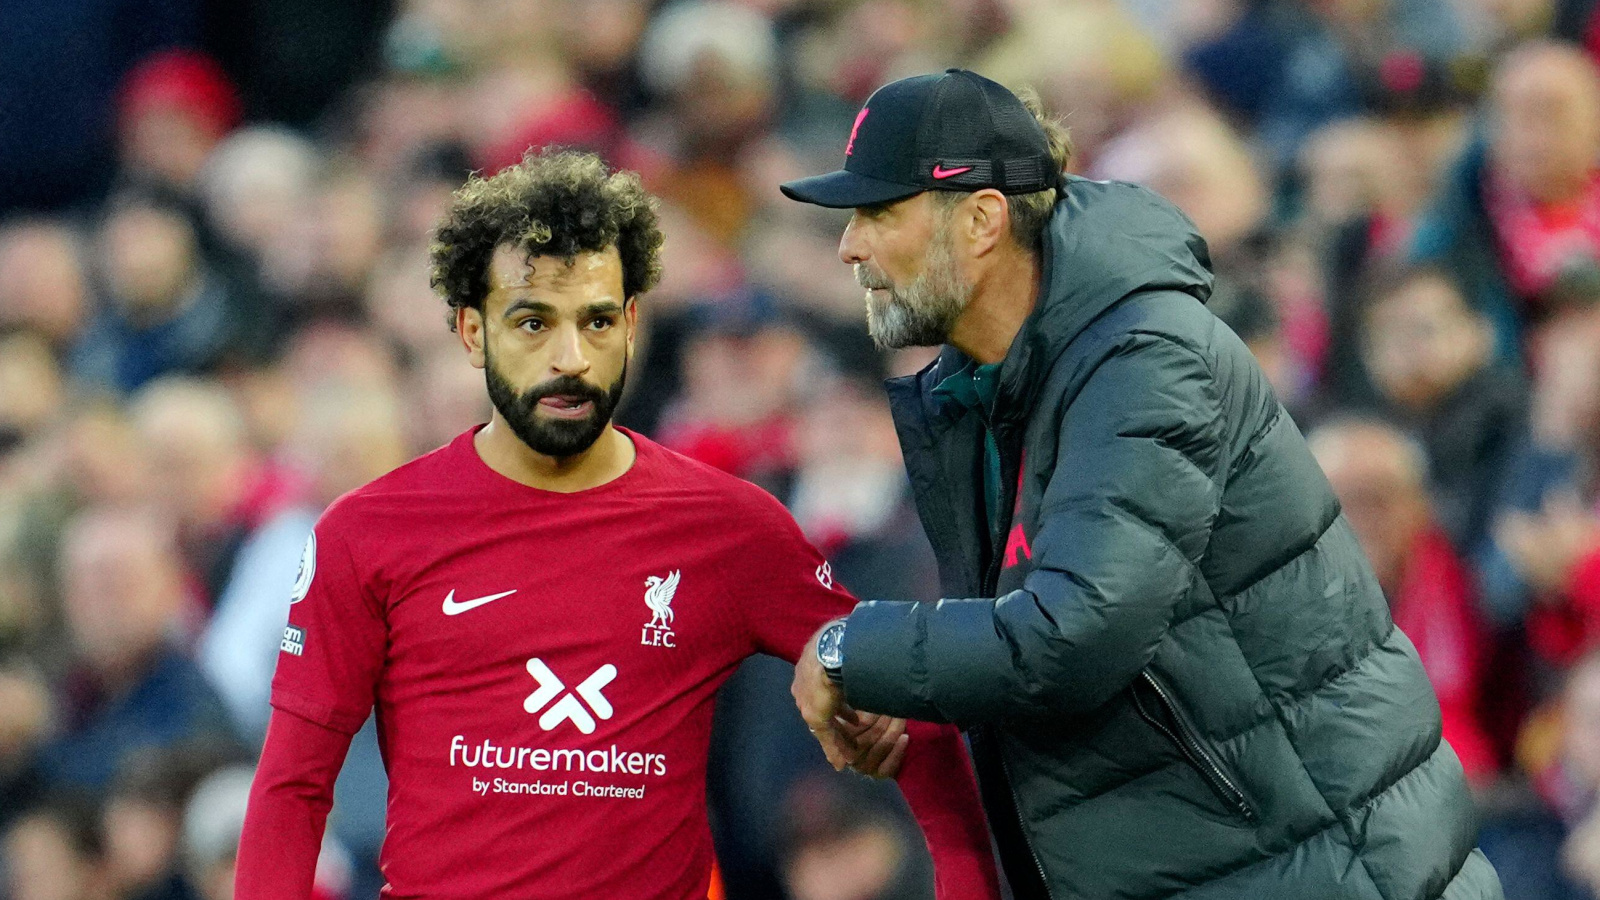 “I would be lying if I said I wish Mohamed Salah good luck in the competition- Jurgen Klopp